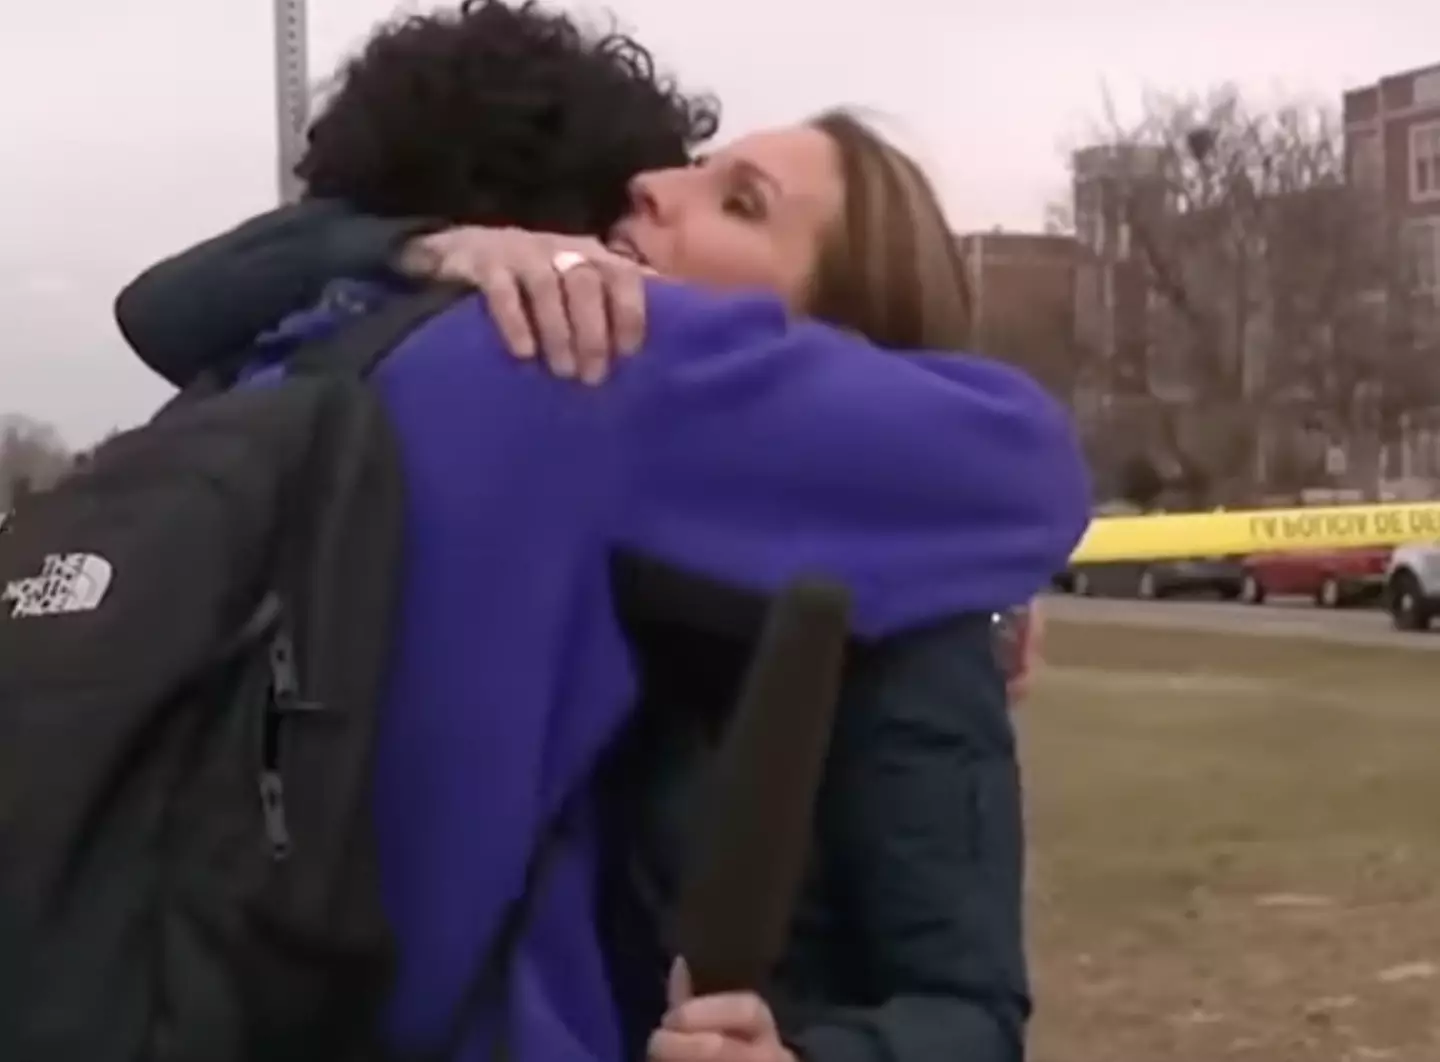 The reporter emotionally hugged her son while on air.